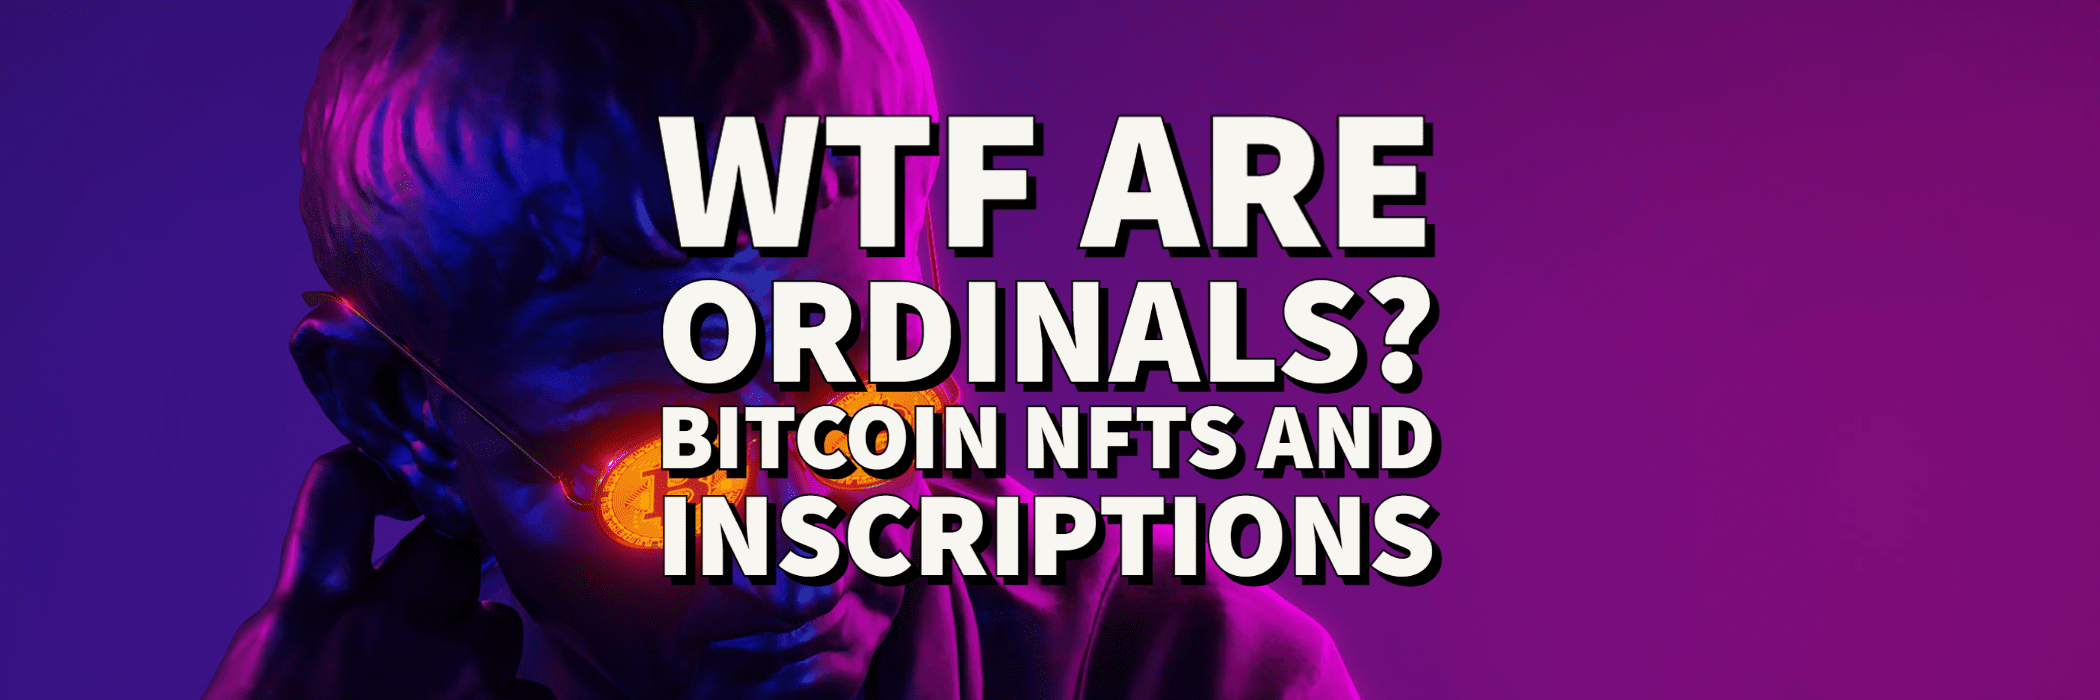 are bitcoins nfts